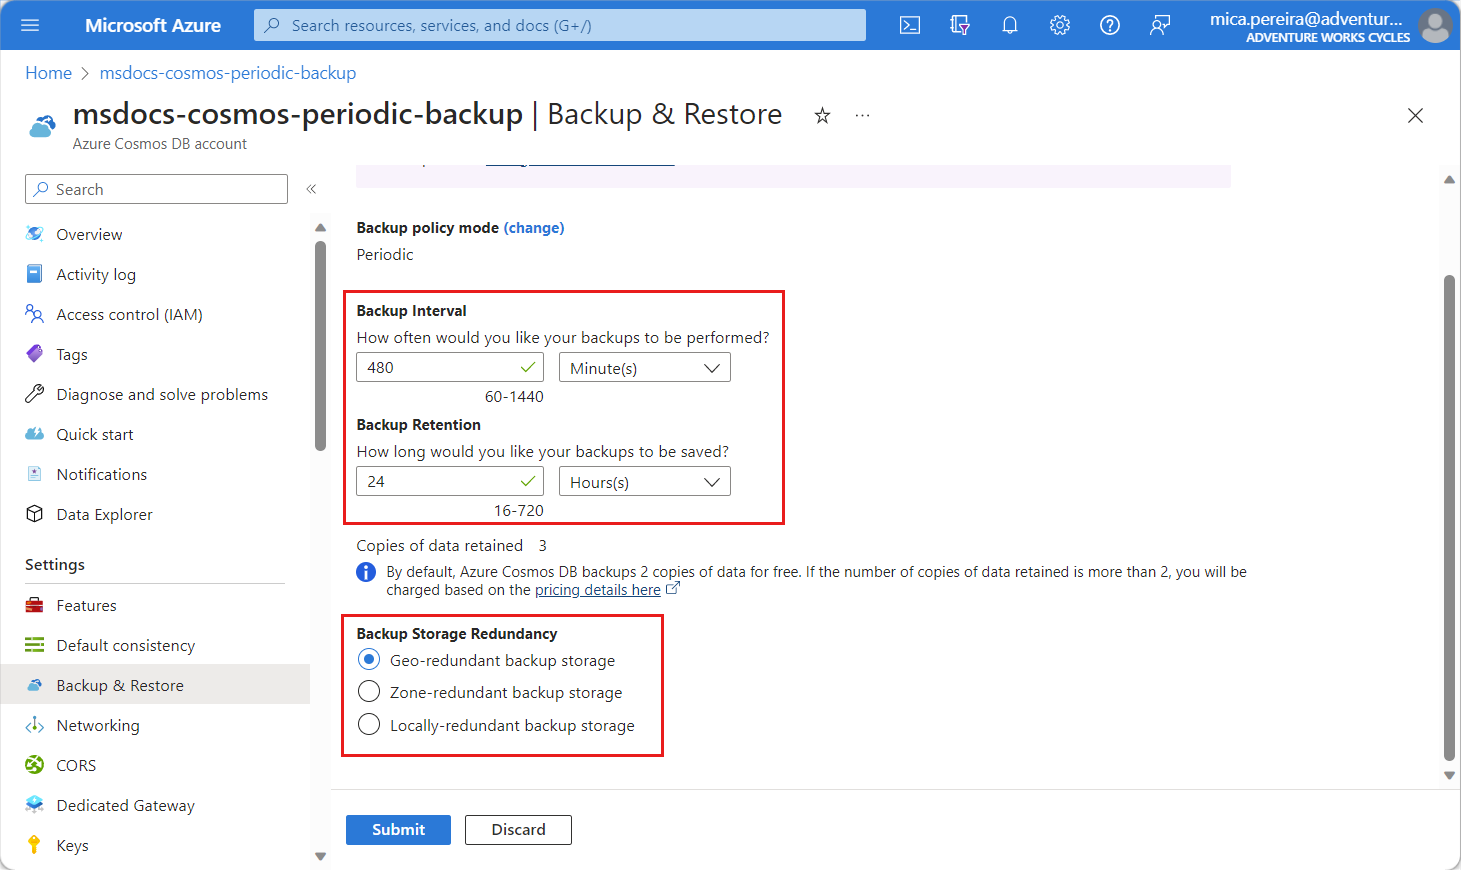 Screenshot of configuration options including backup interval, retention, and storage redundancy for an existing Azure Cosmos DB account.